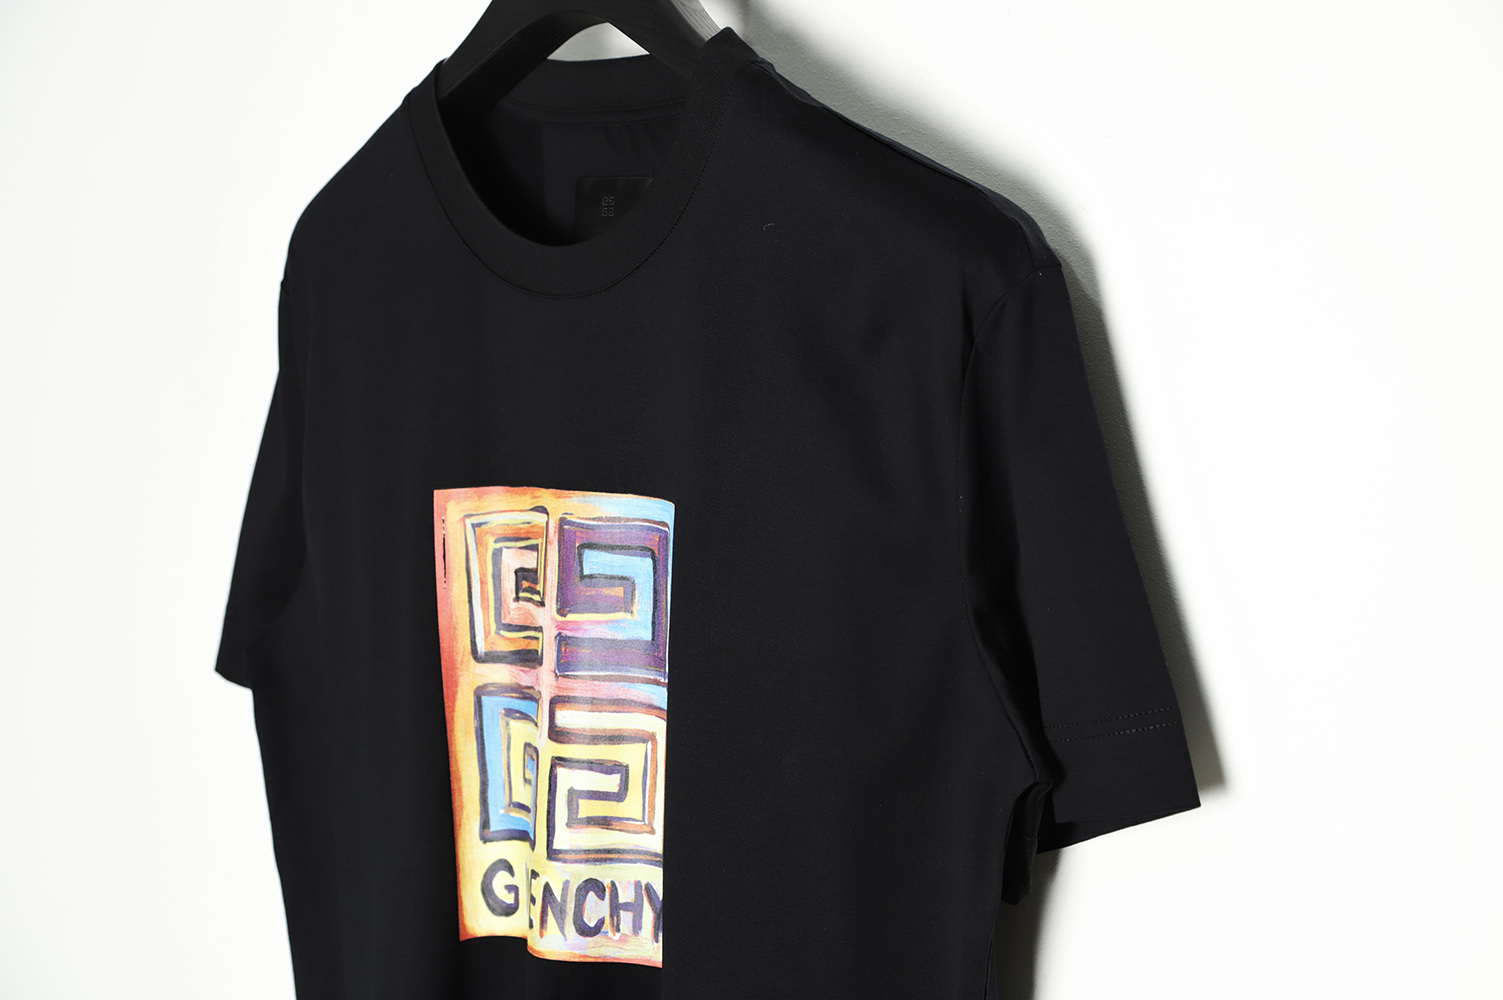 Givenchy 22SS hand-painted sun short-sleeved T-shirt TSK1